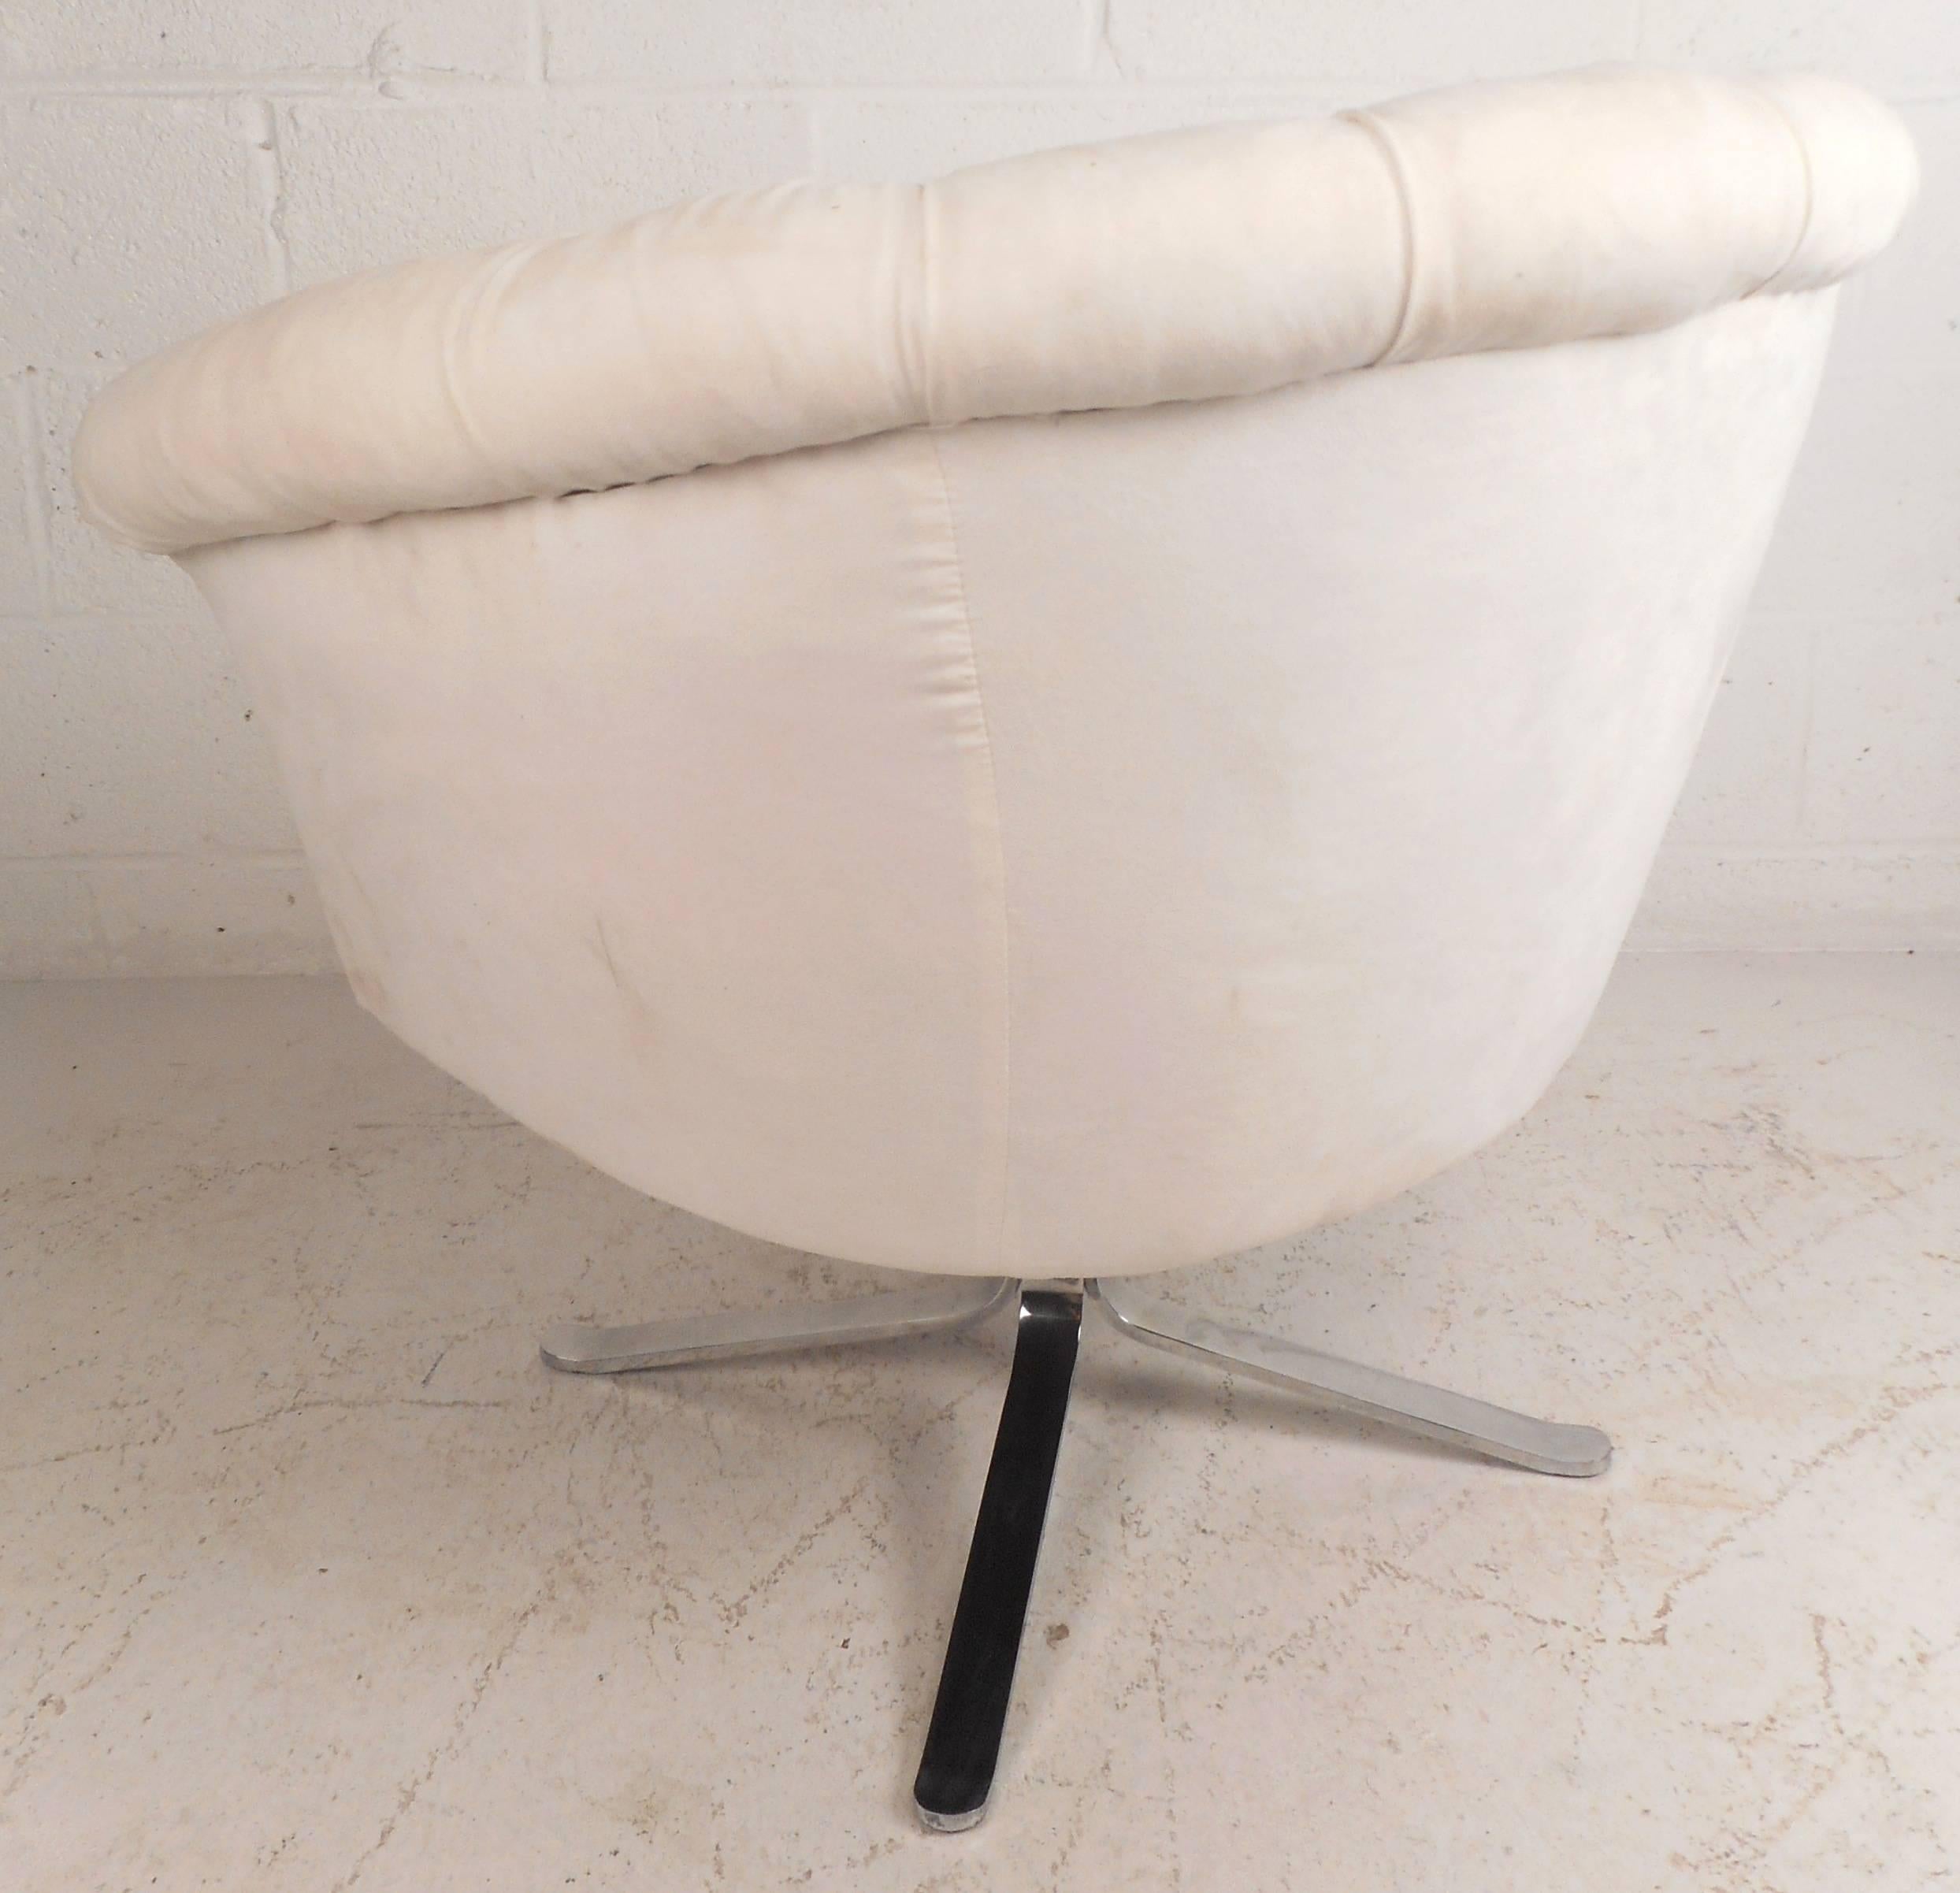 Beautiful vintage modern lounge chair features thick padded seating with plush velvet upholstery. This luxury style barrel back chair has an unusual chrome swivel base with splayed legs. Sleek design with tufted upholstery and winged arm rests